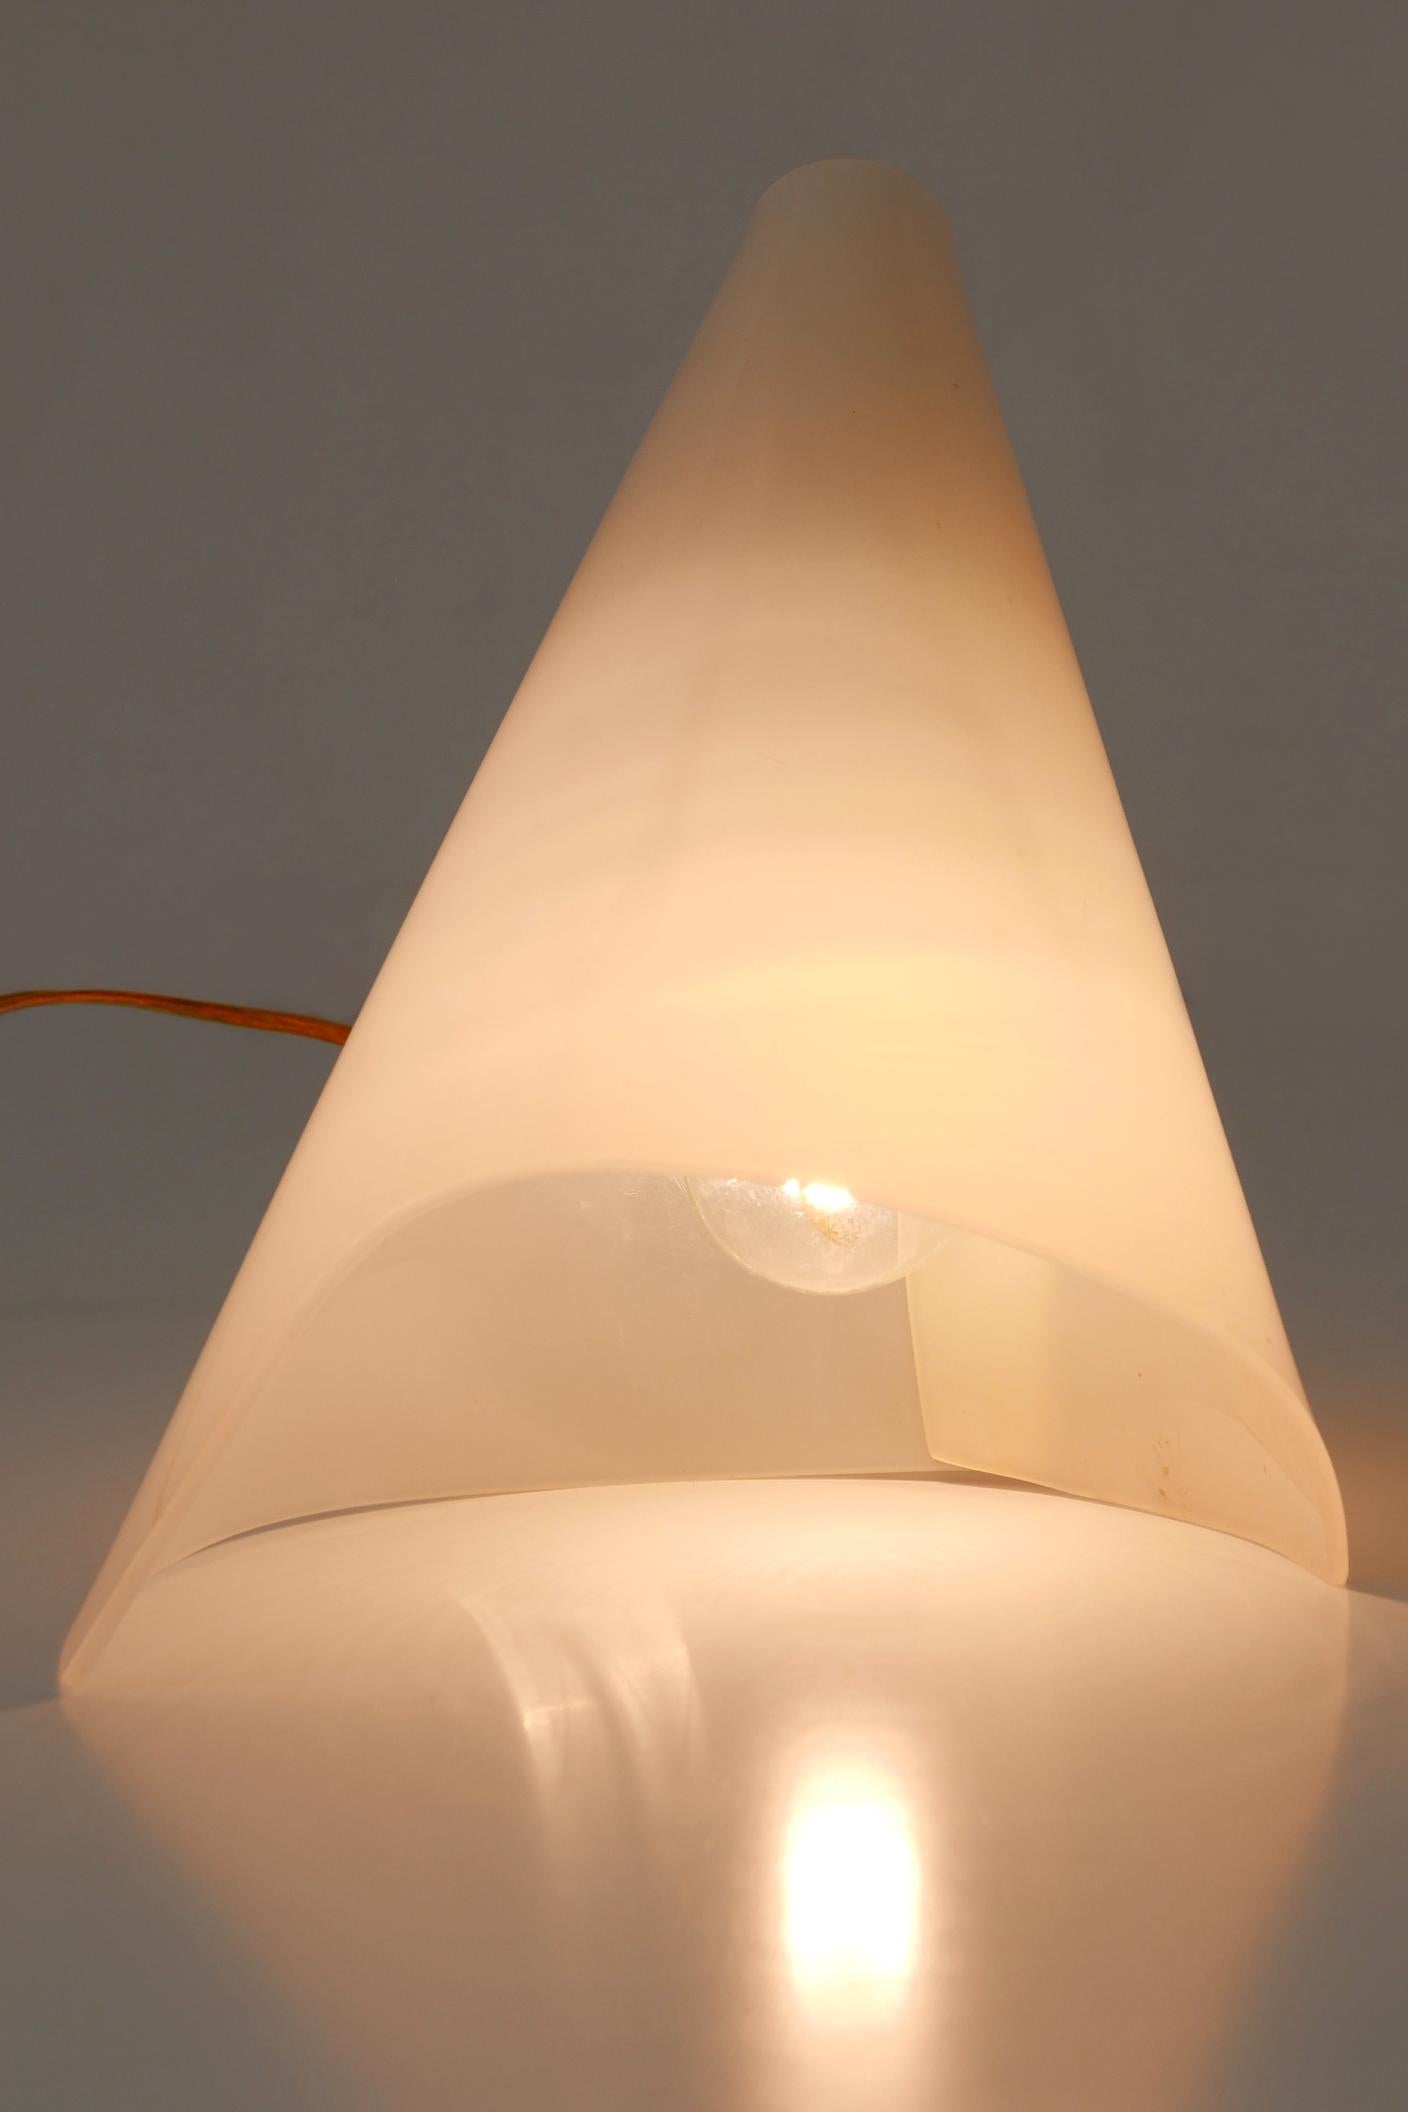 Extremely Rare and Lovely Mid-Century Modern Lucite Table Lamp Sweden 1960s For Sale 5